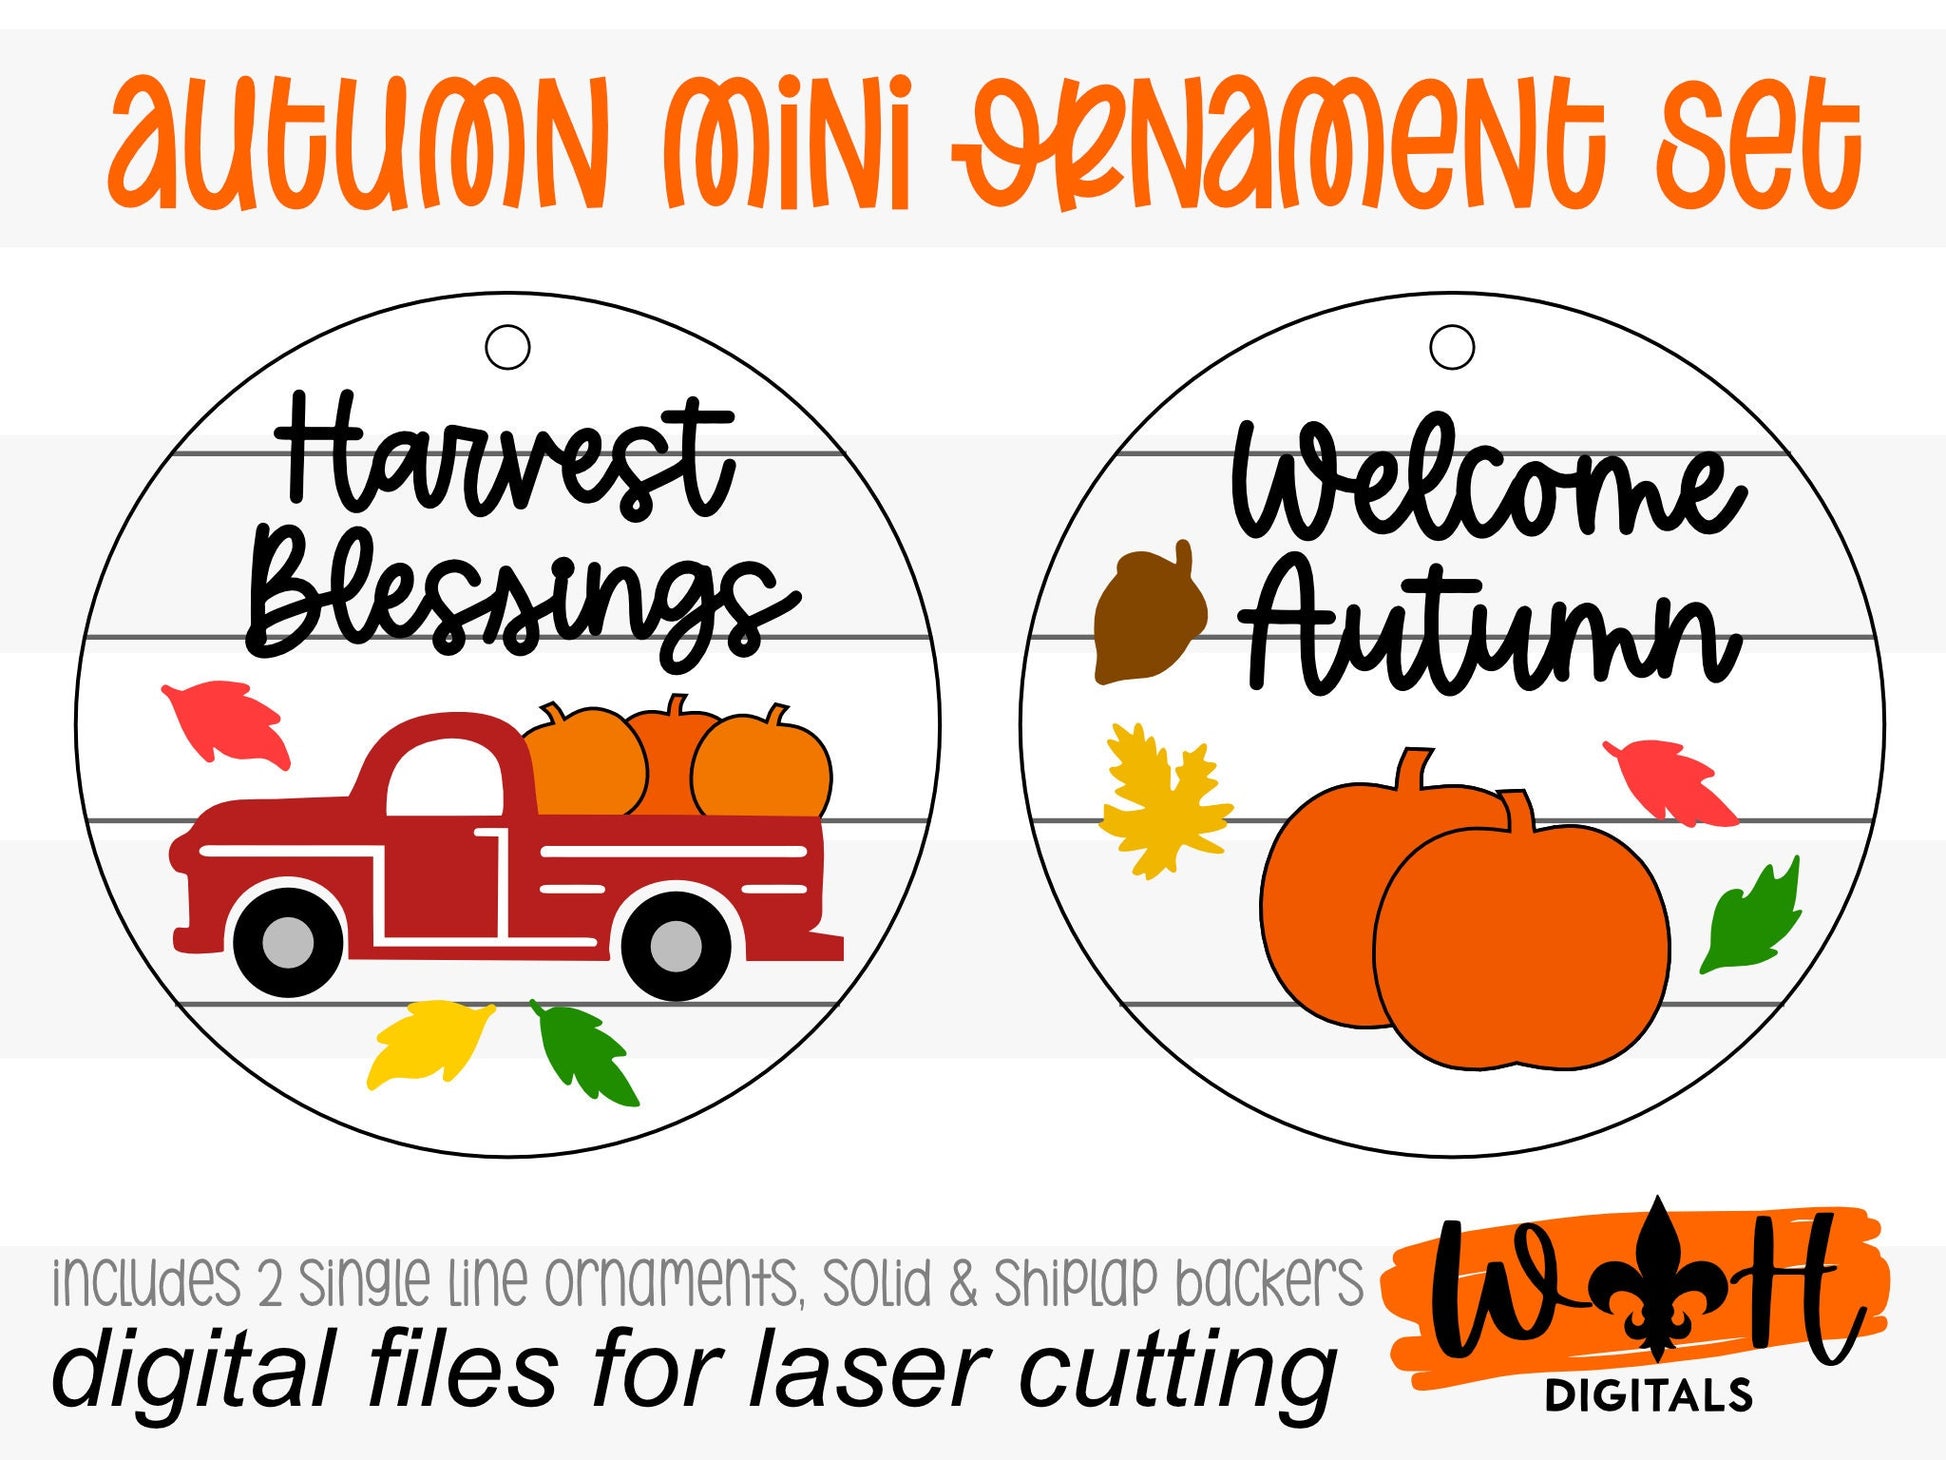 Welcome Autumn and Harvest Blessings Fall Traditions Mini Ornament Set - Files for Cutting Machines and Glowforge Lasers - Digital SVG File